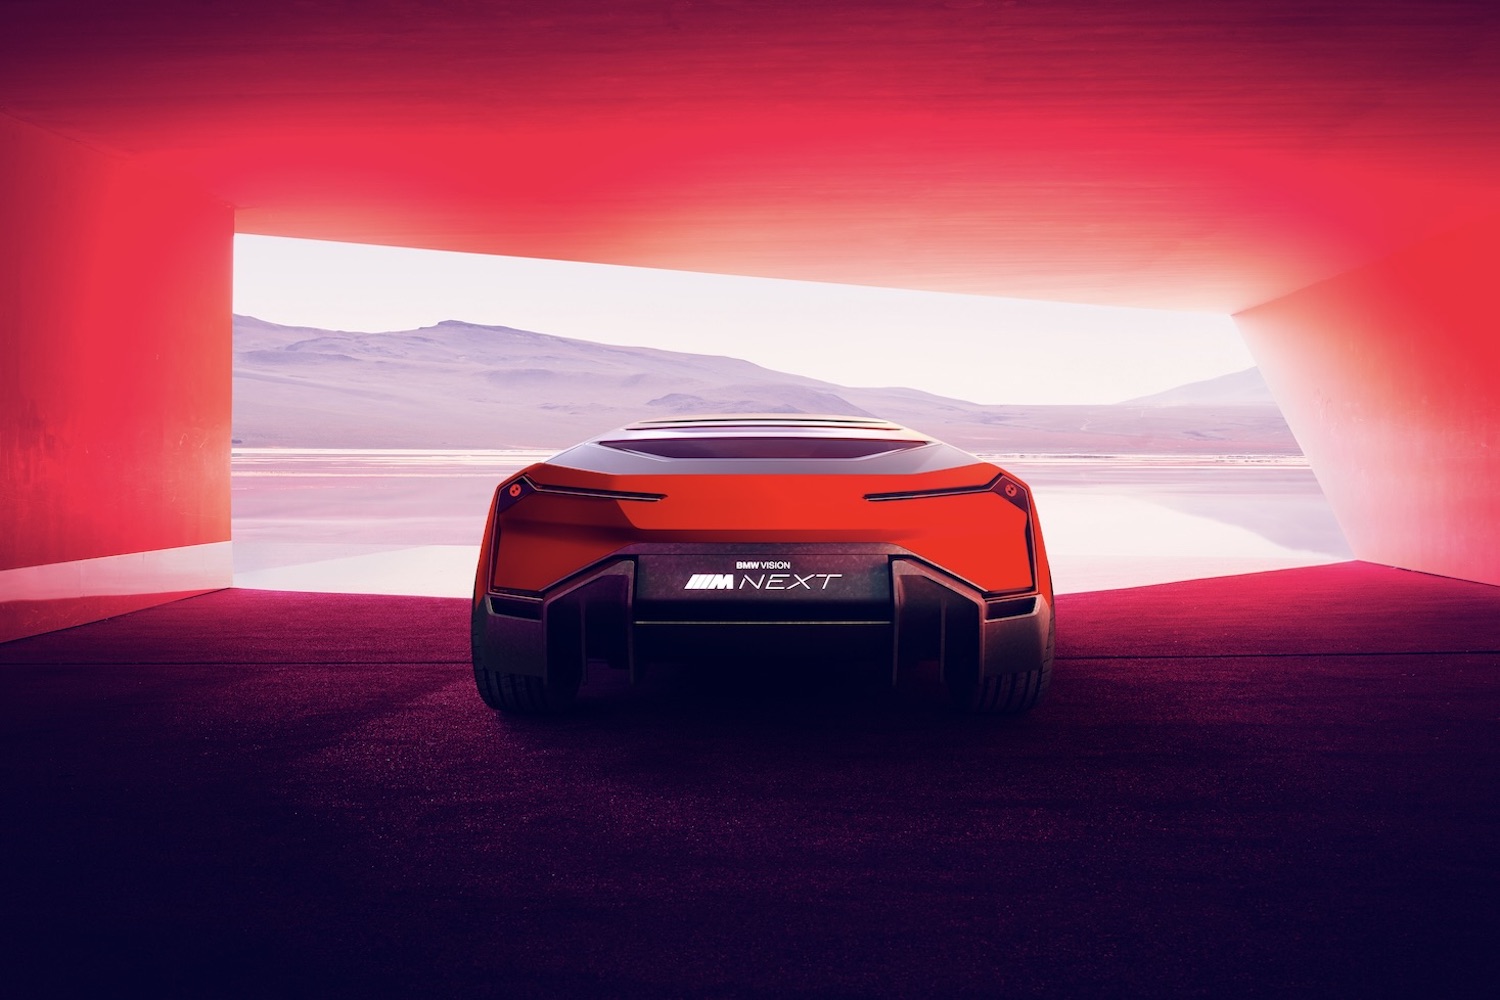 BMW M Vision NEXT Concept close up of rear end parked in a red garage with mountains in the back.